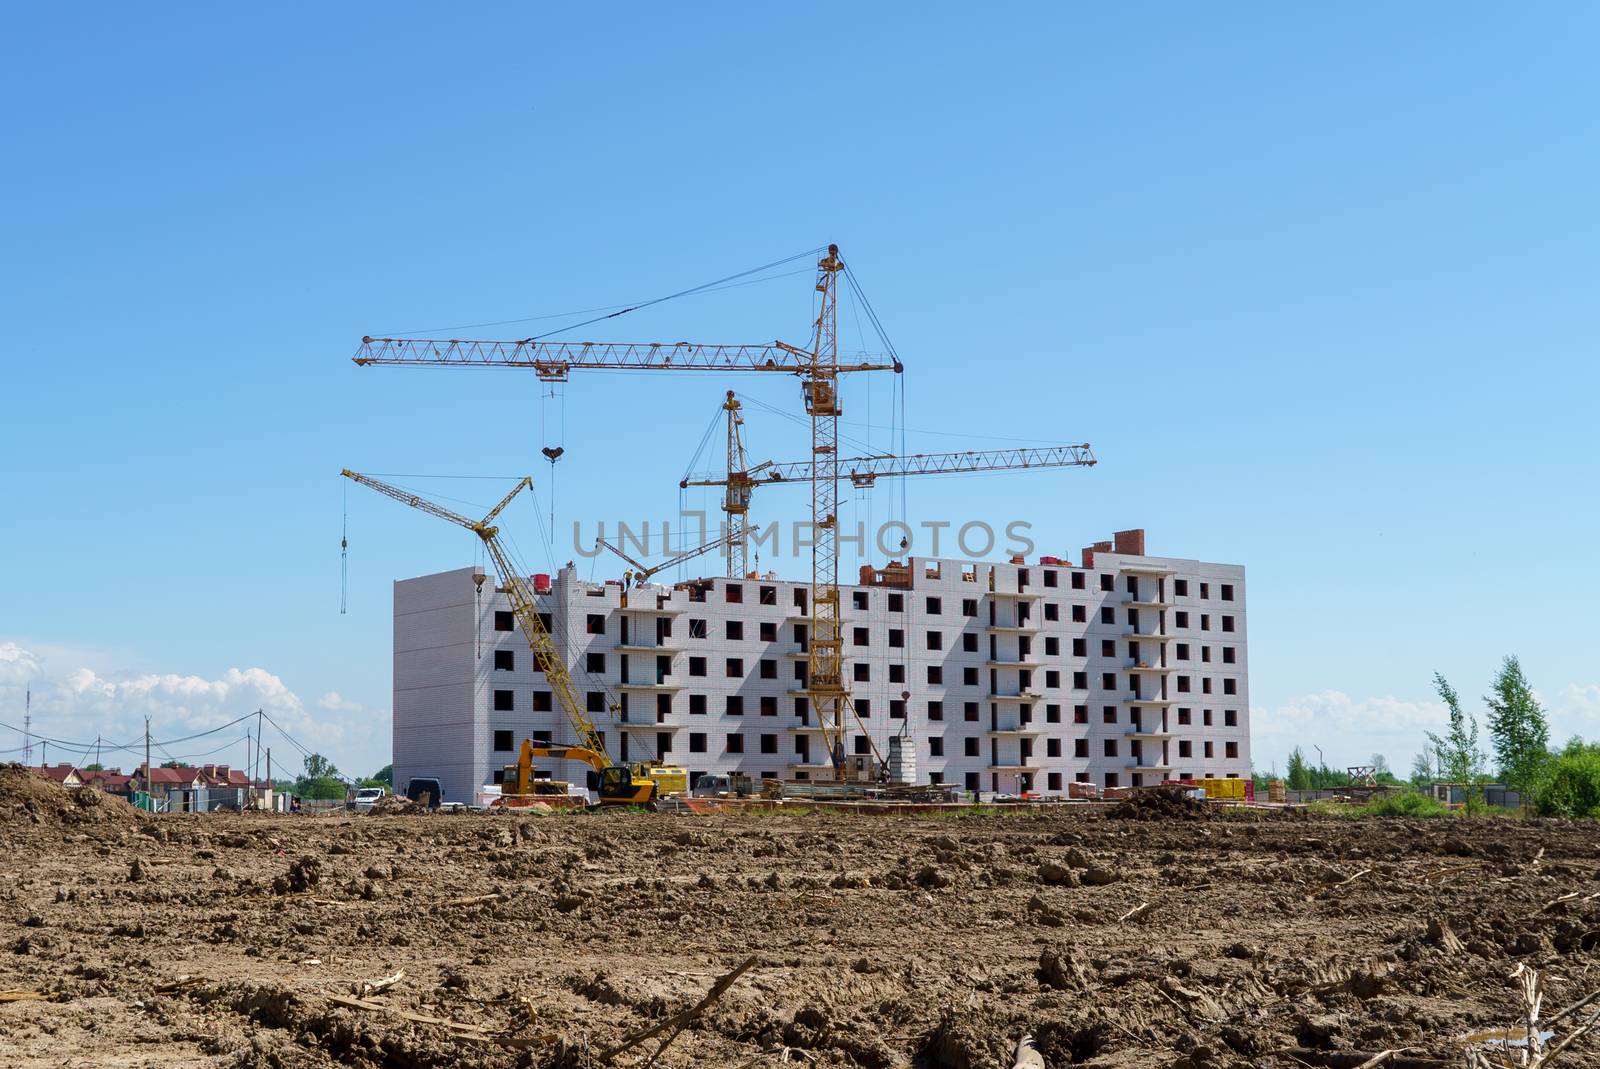 The construction of a multistory building. Construction cranes are on the building site